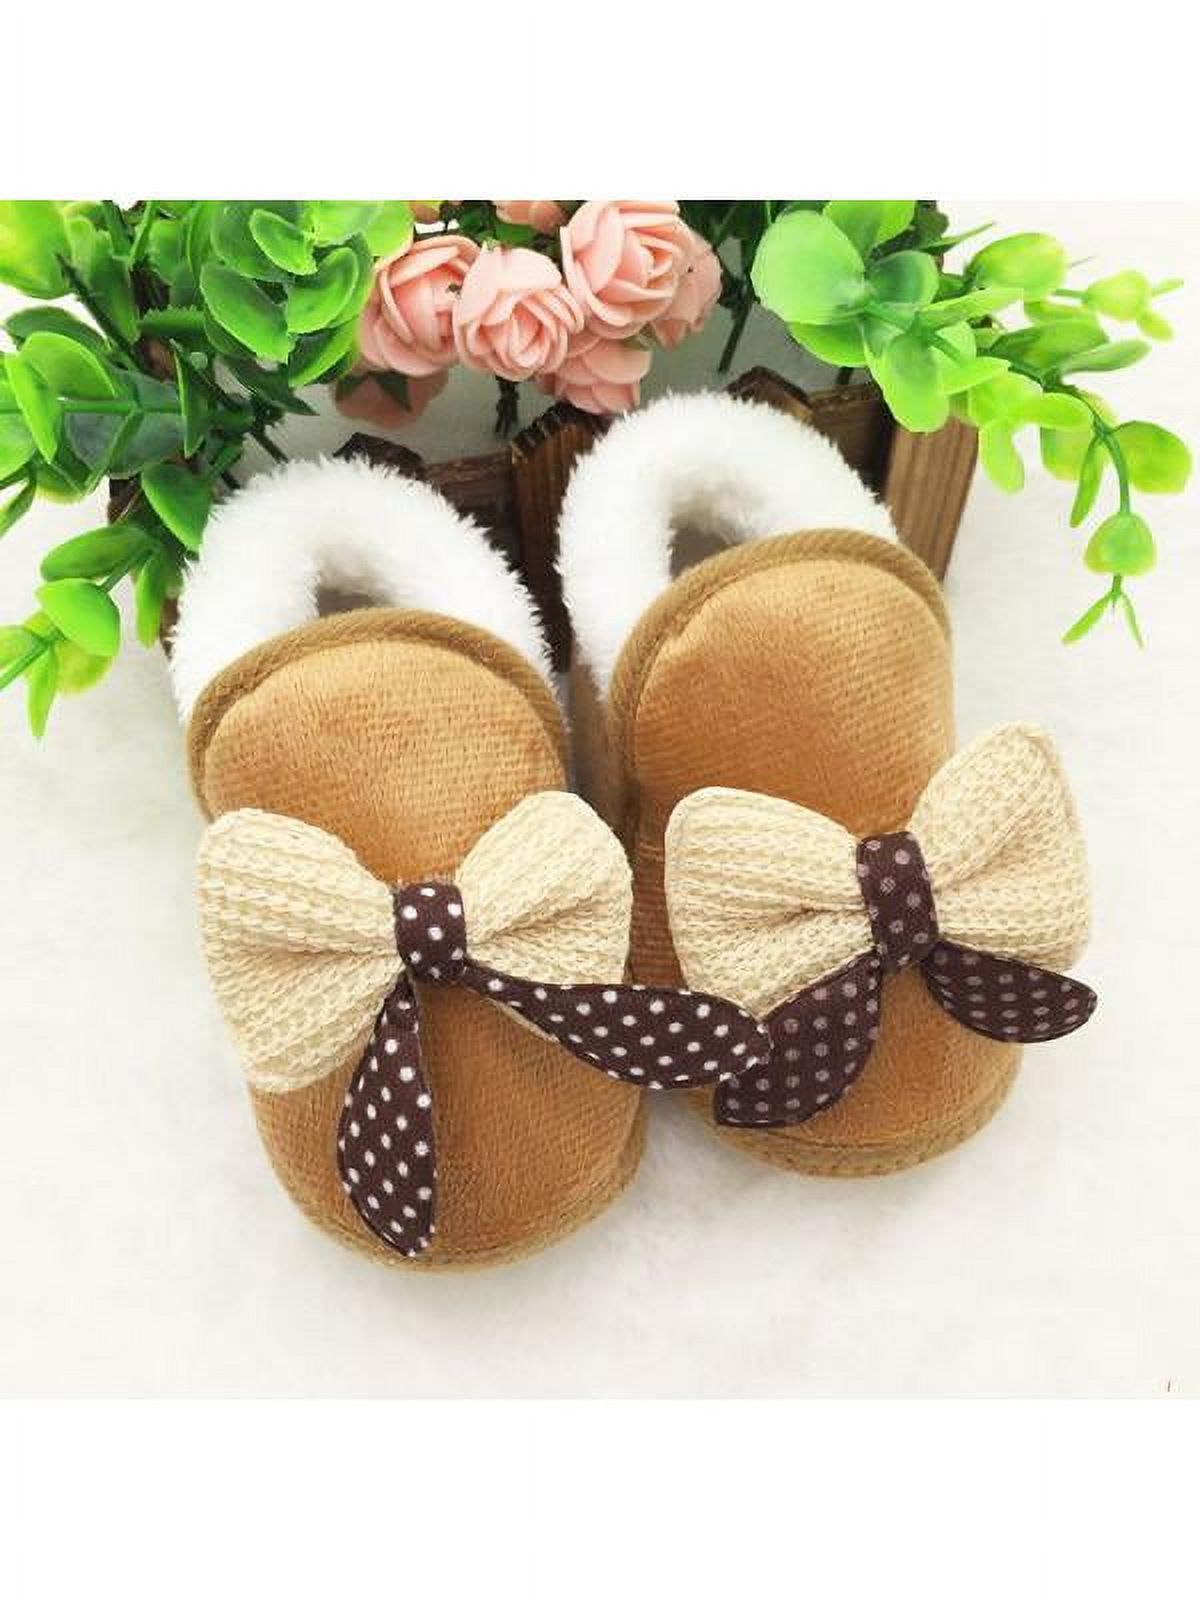 Taykoo Winter Warm Baby Boys Girls Slippers Non Slip Snow Boots Crib Casual Shoes 0-18M - image 2 of 3